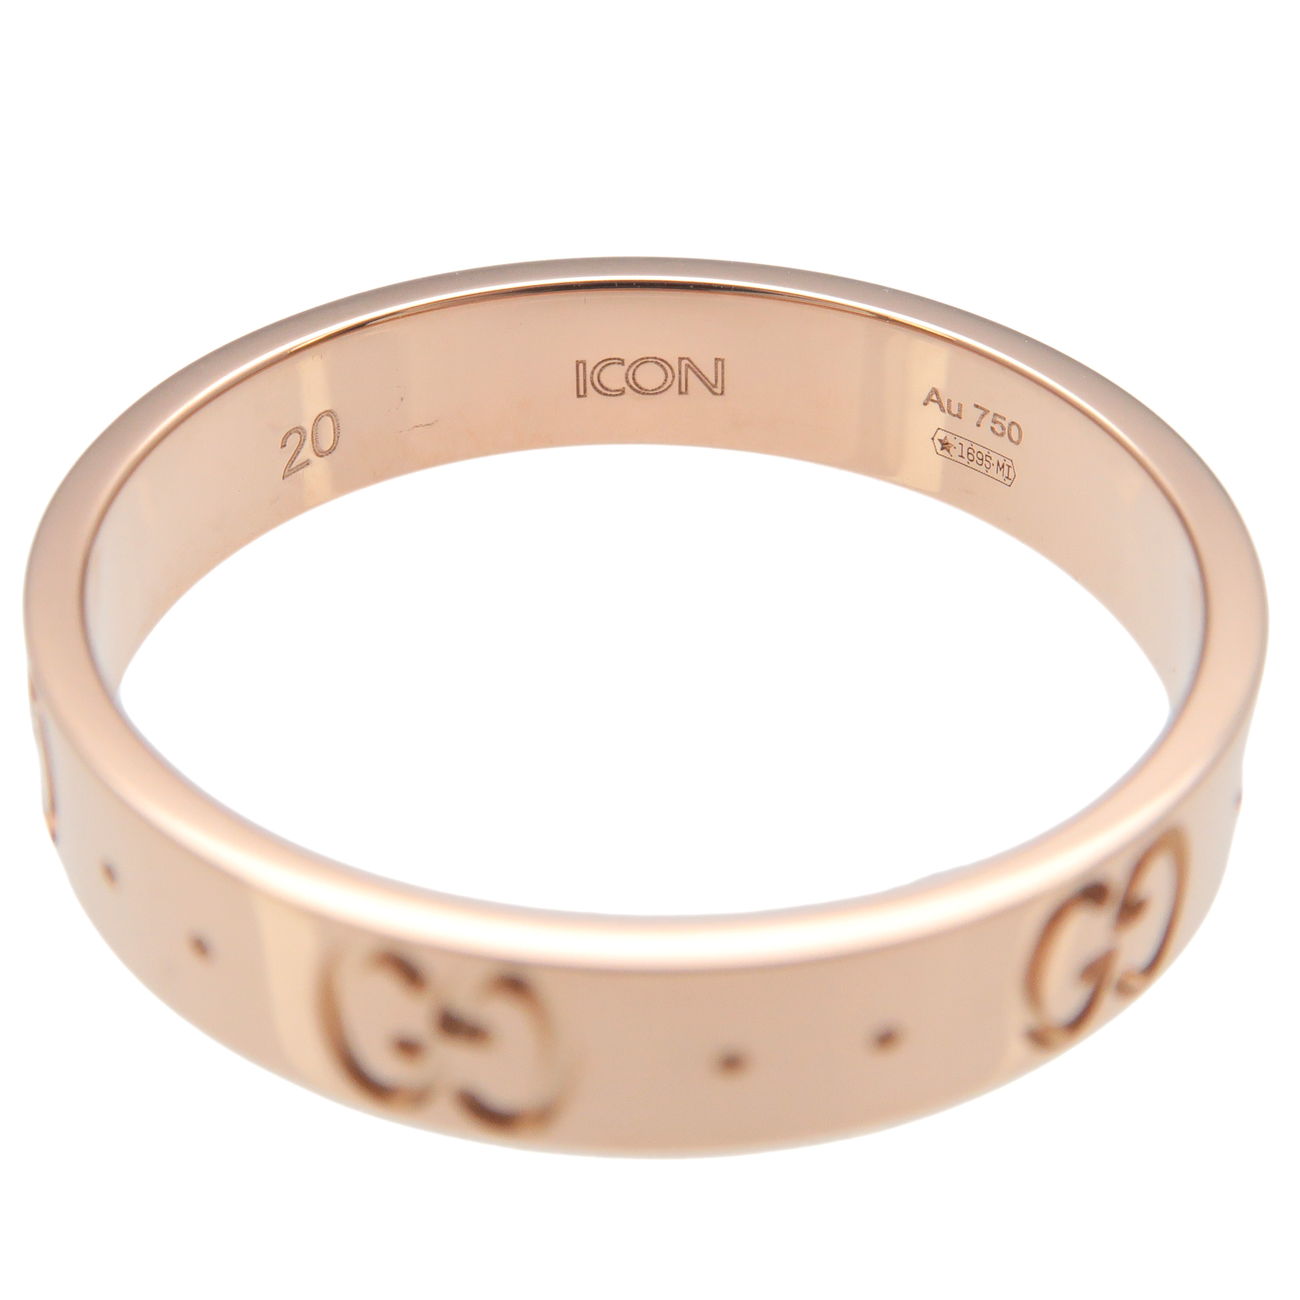 GUCCI Icon Ring K18PG 750PG Rose Gold #20 US9-9.5 EU60